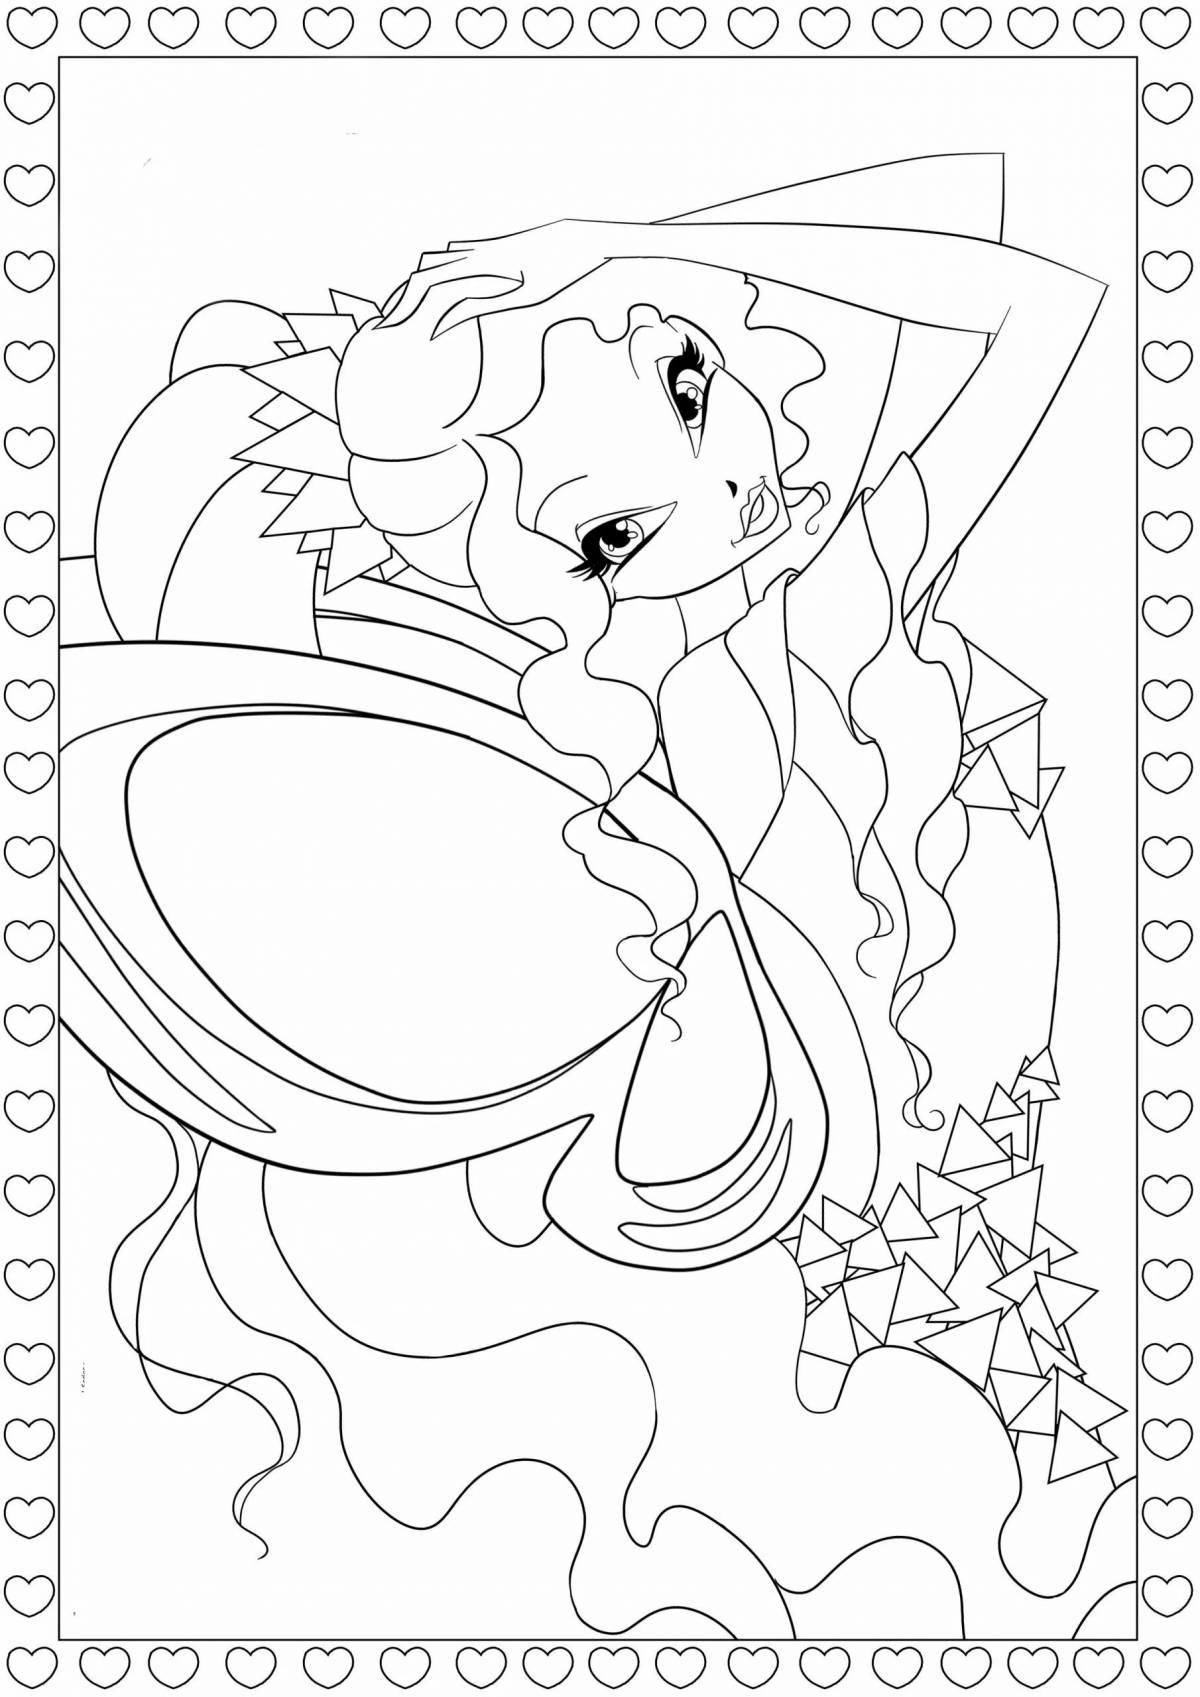 Colorful tynix winx coloring page